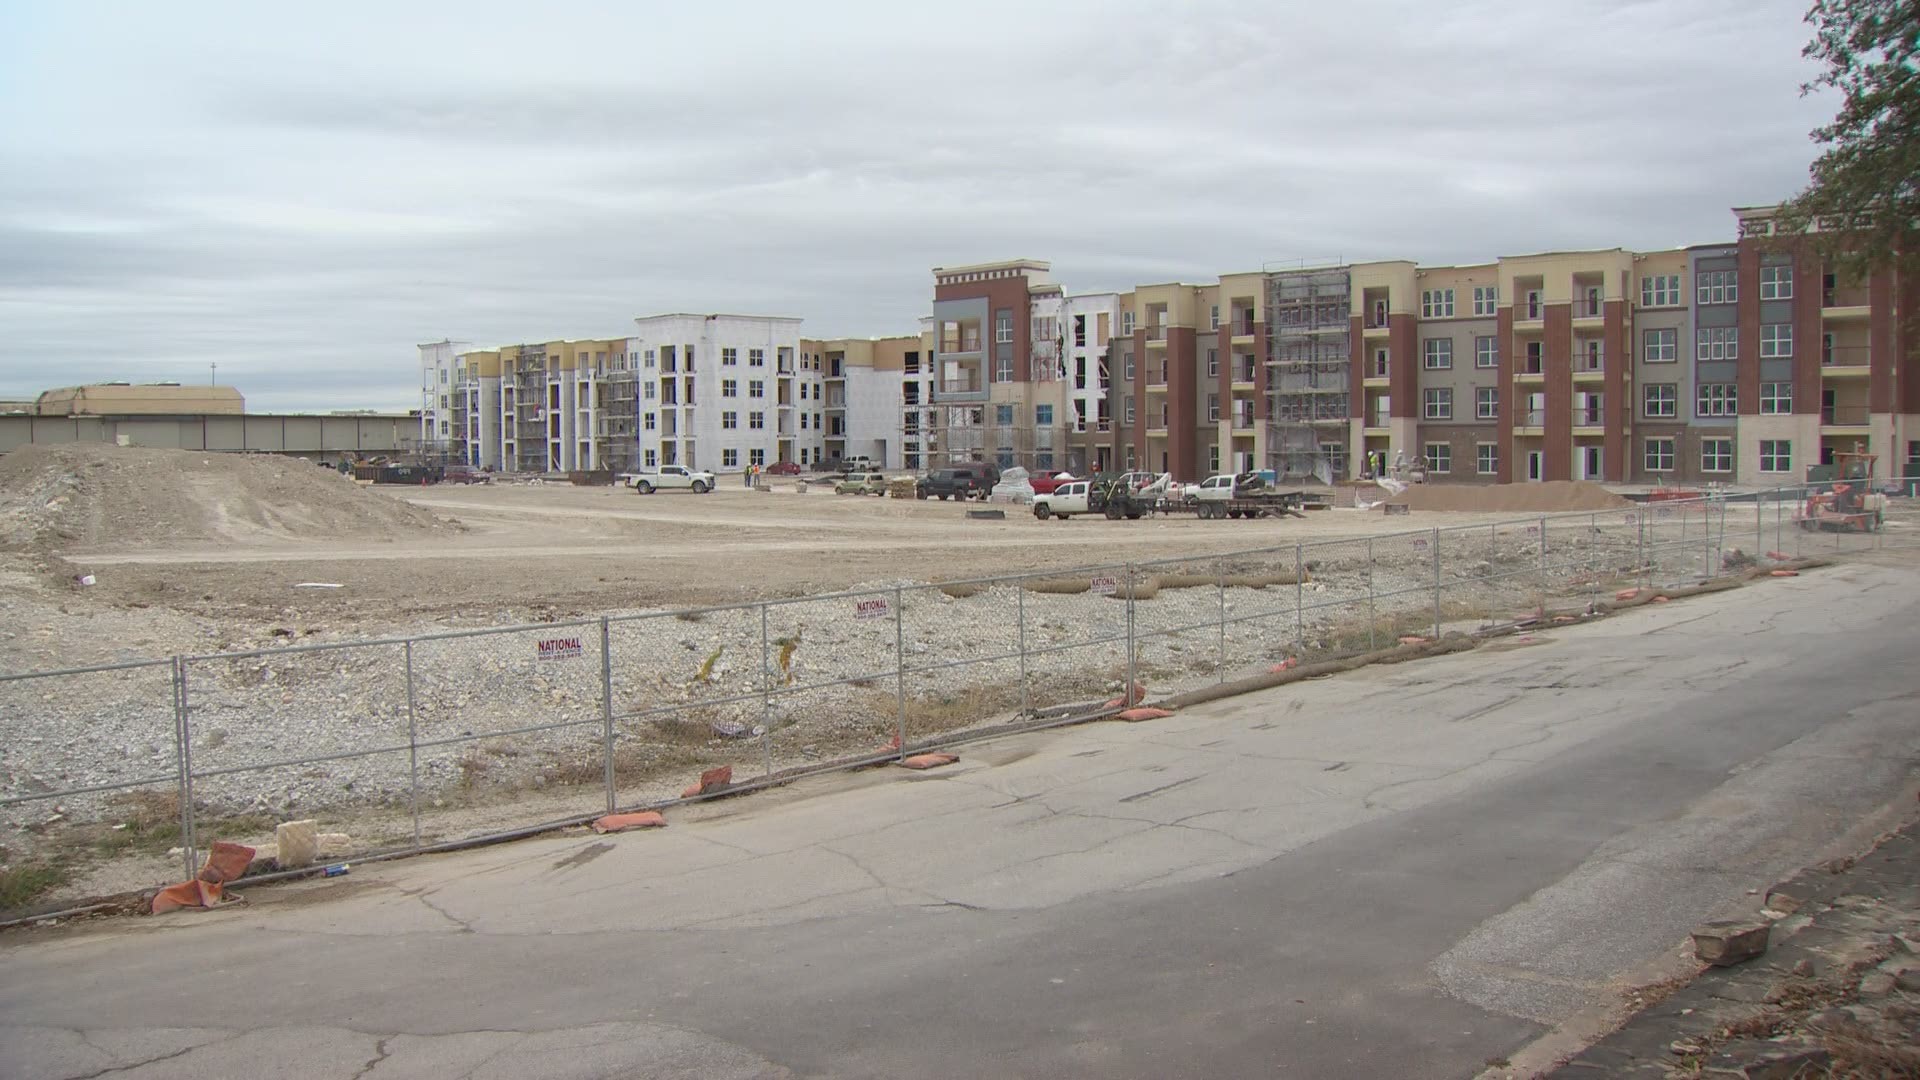 Development projects are in full swing in parts of southern Dallas. Plans for future growth across the city’s southern region continues to be a hot topic.